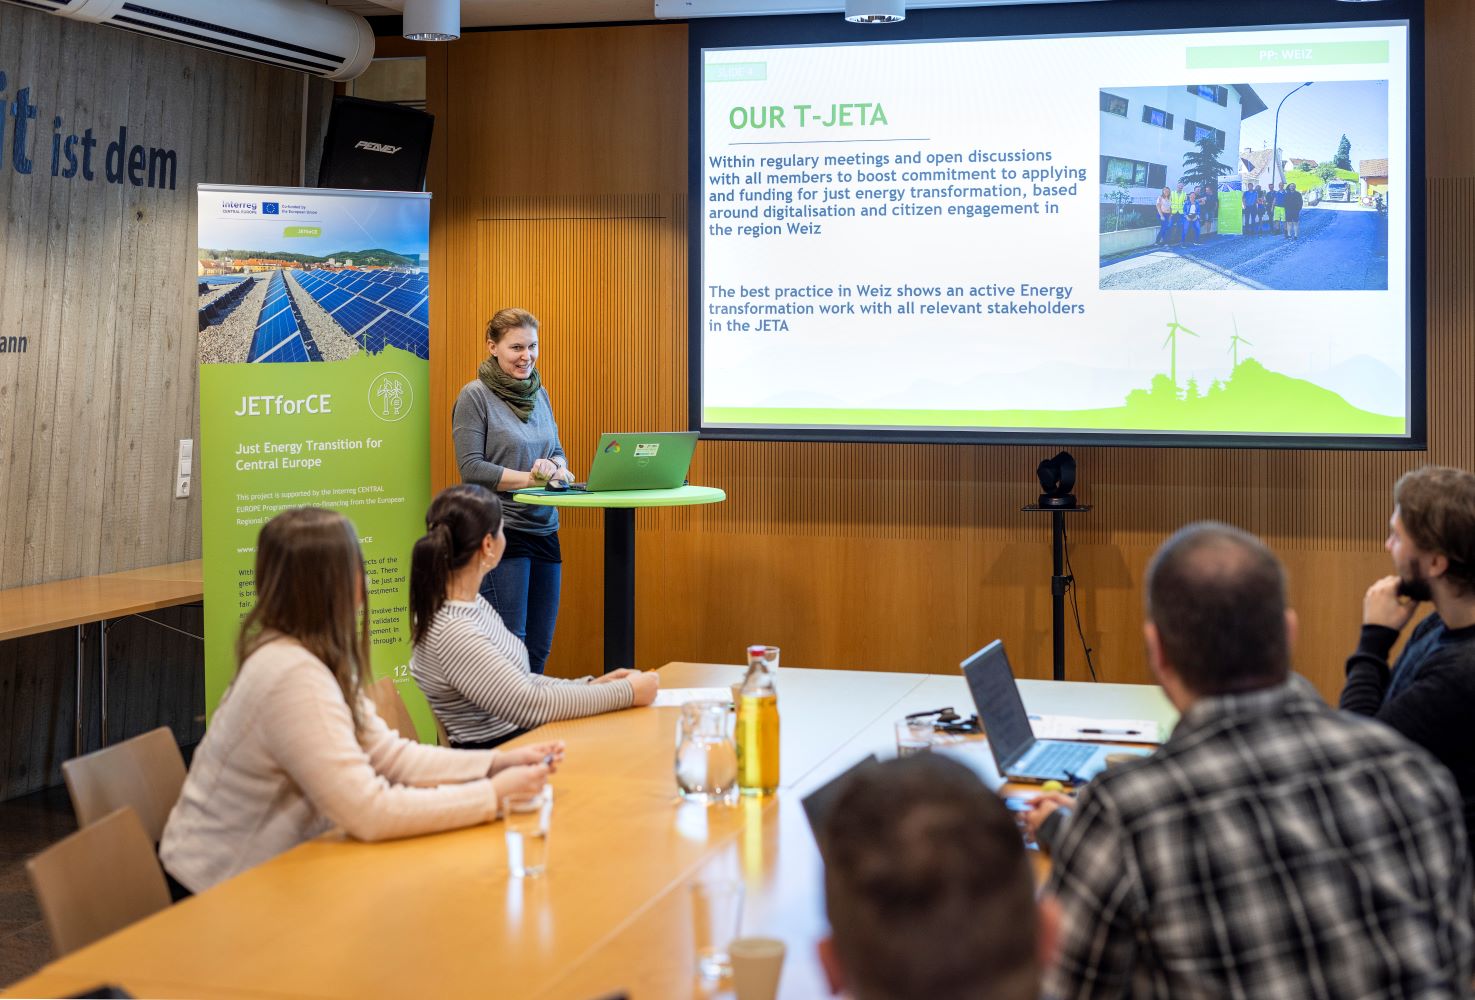 Innovation Centre W.E.I.Z Hosts Successful Launch Event of Challenge Mapping Tool for Energy Transition